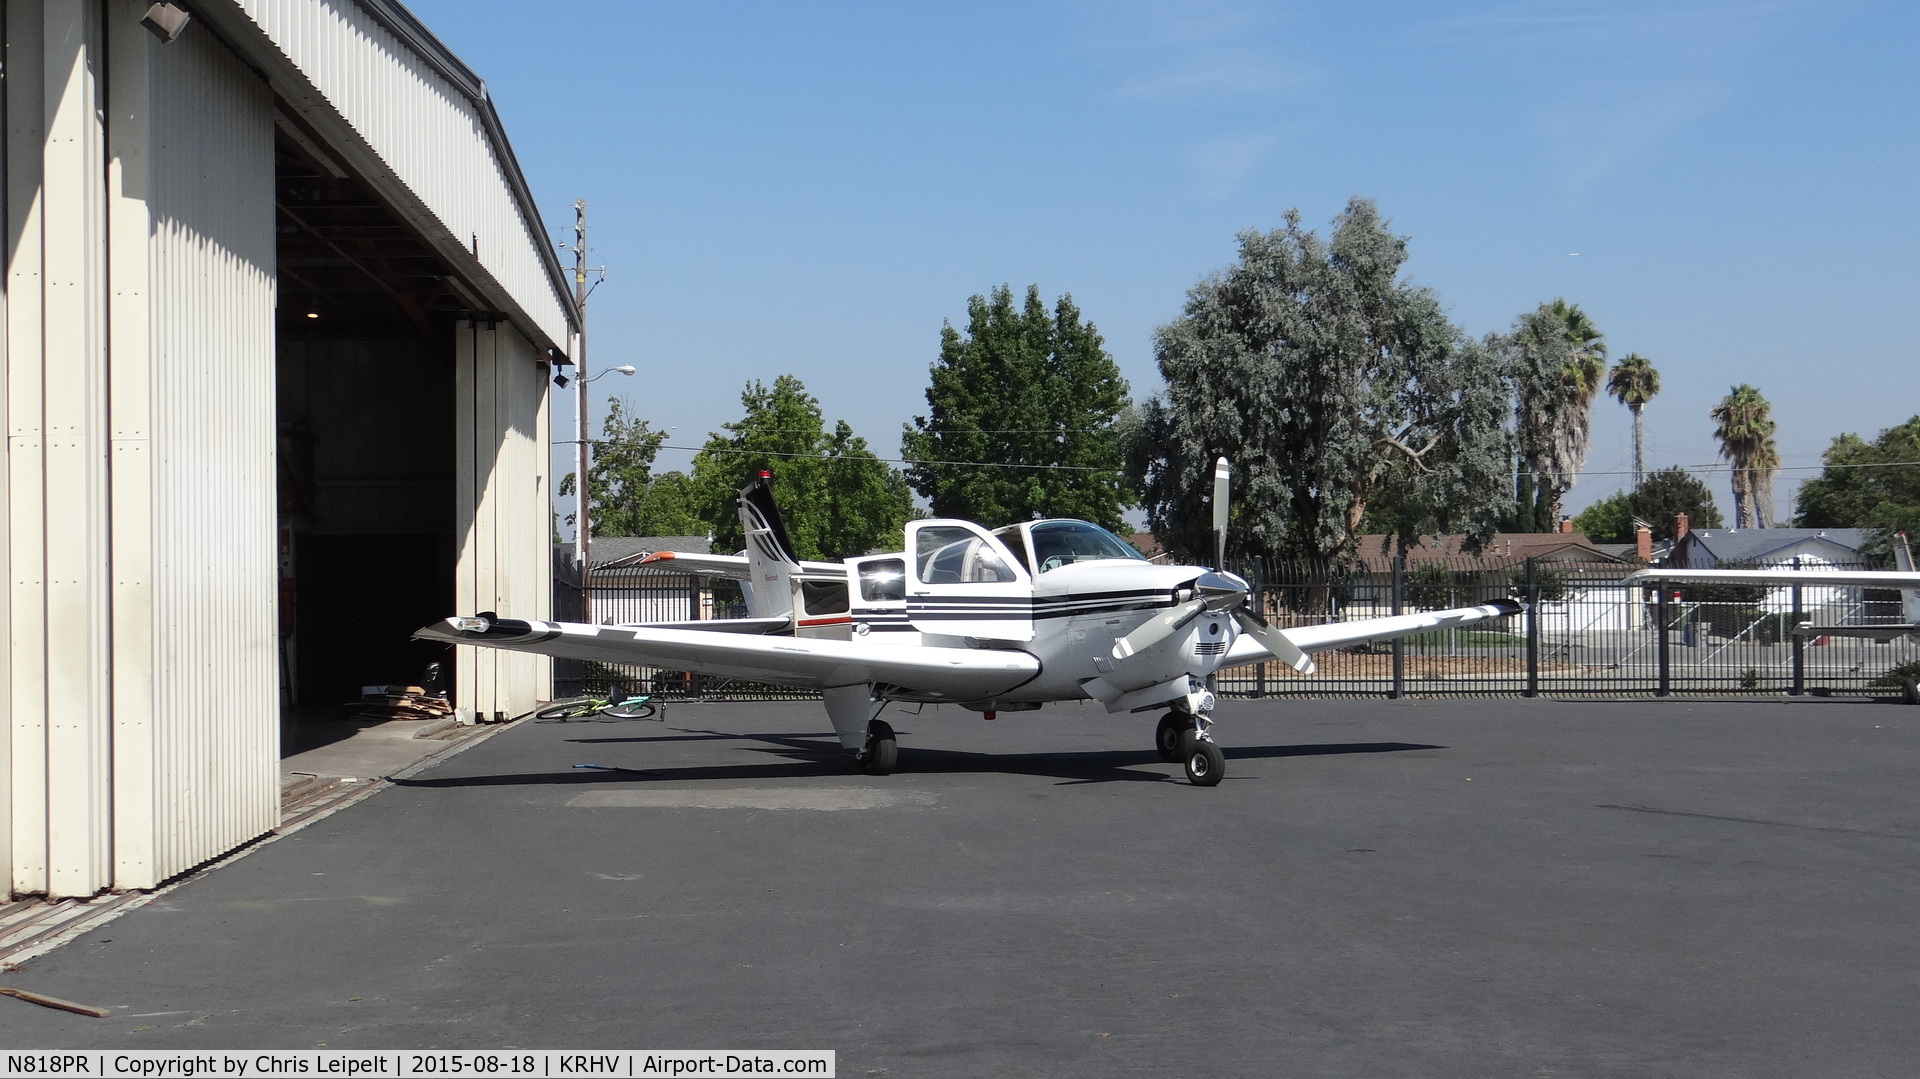 N818PR, 2001 Raytheon Aircraft Company A36 Bonanza C/N E-3397, Locally-based 2001 Beechcraft A36 Bonanza in for avionics work at Reid Hillview Airport, San Jose, CA. I was told this owner of this BE36 used to have a PC-12 back in the good old days and based it at KRHV. What a sight that must've been!